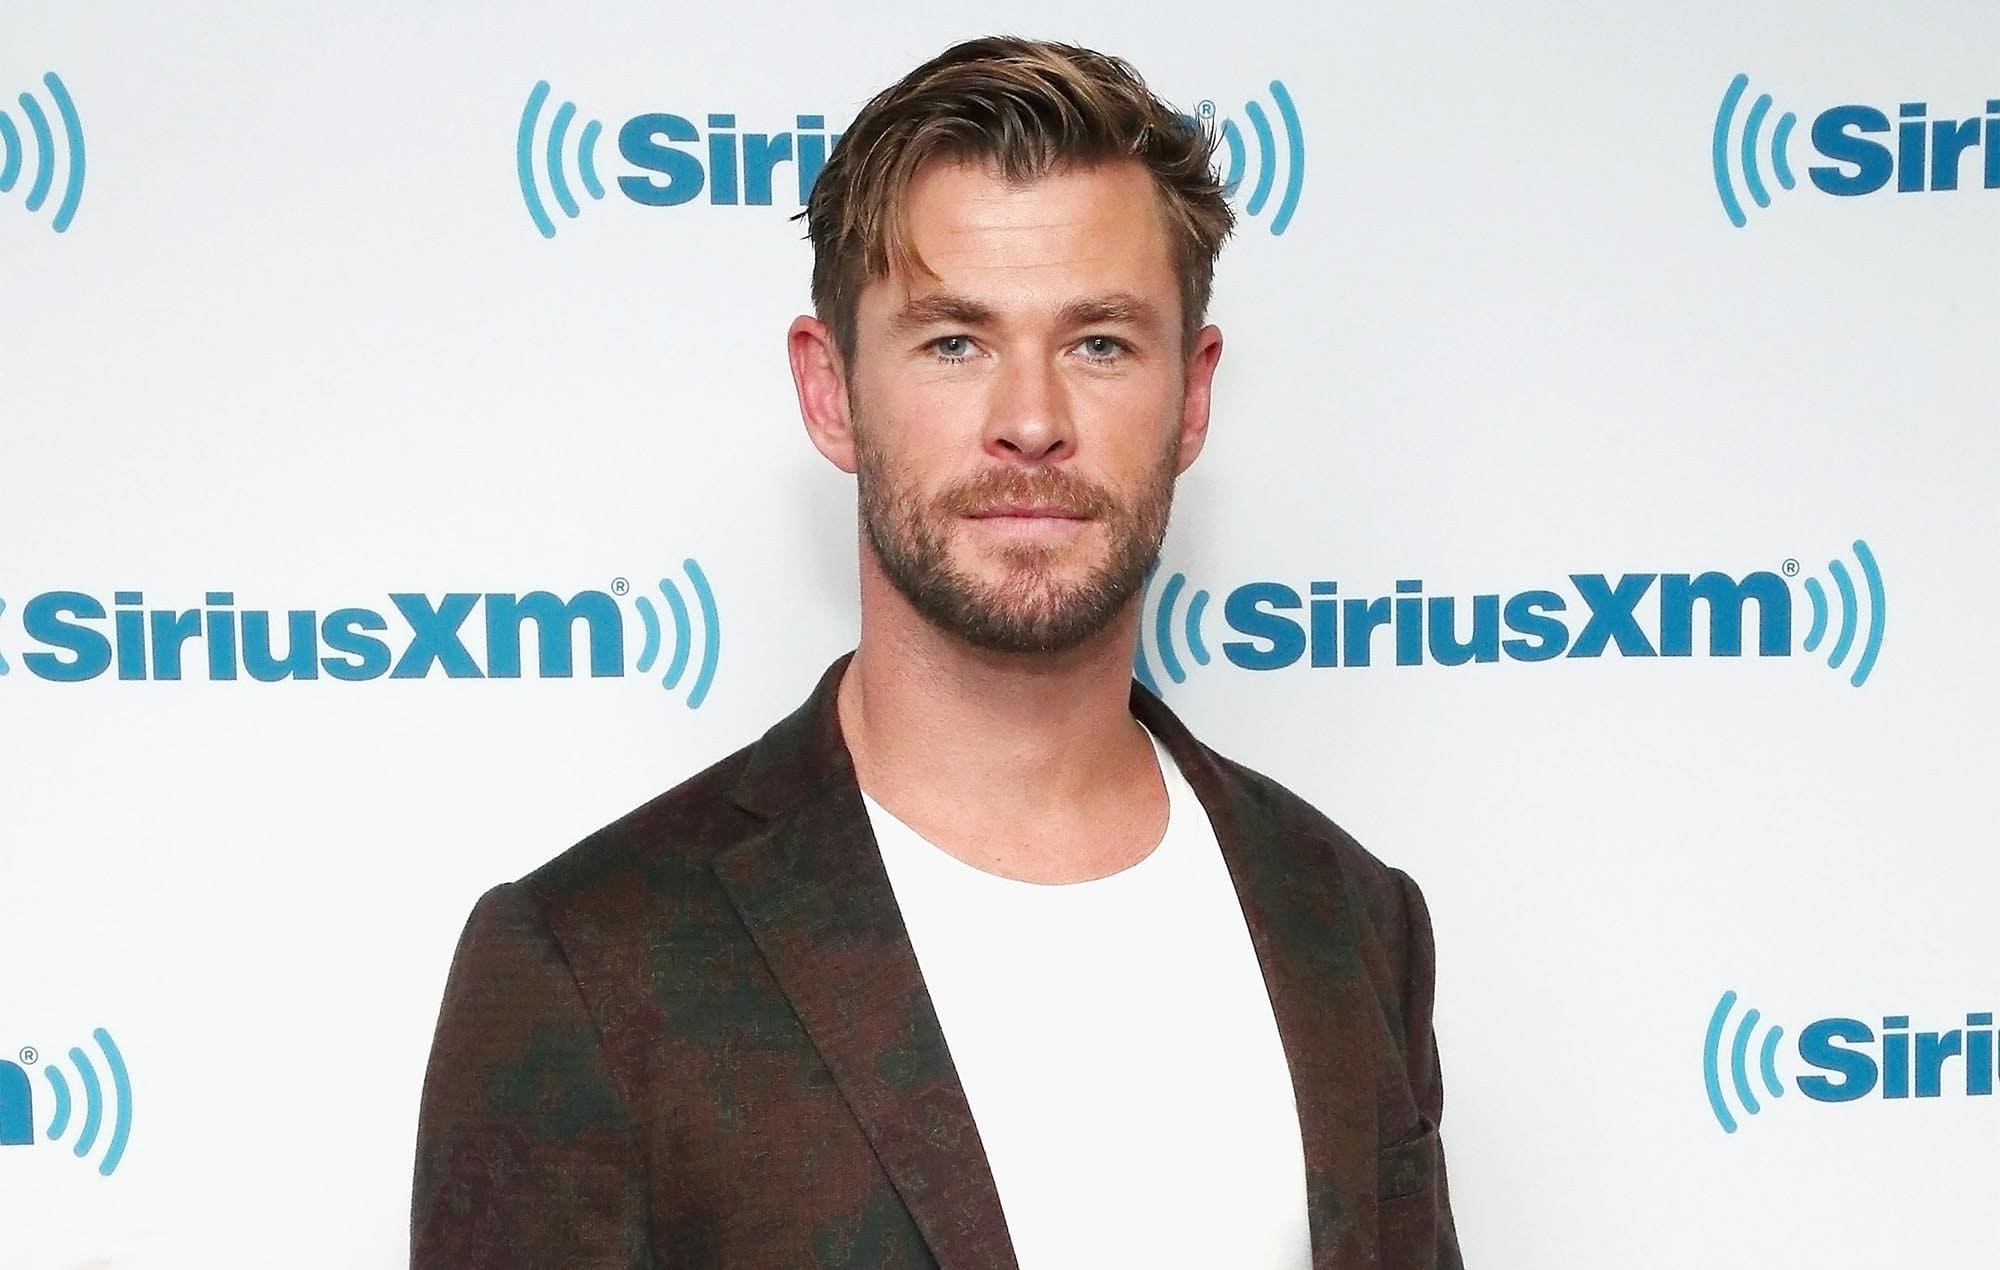 thors-nude-butt-scene-in-love-and-thunder-is-a-dream-come-true-for-chris-hemsworth